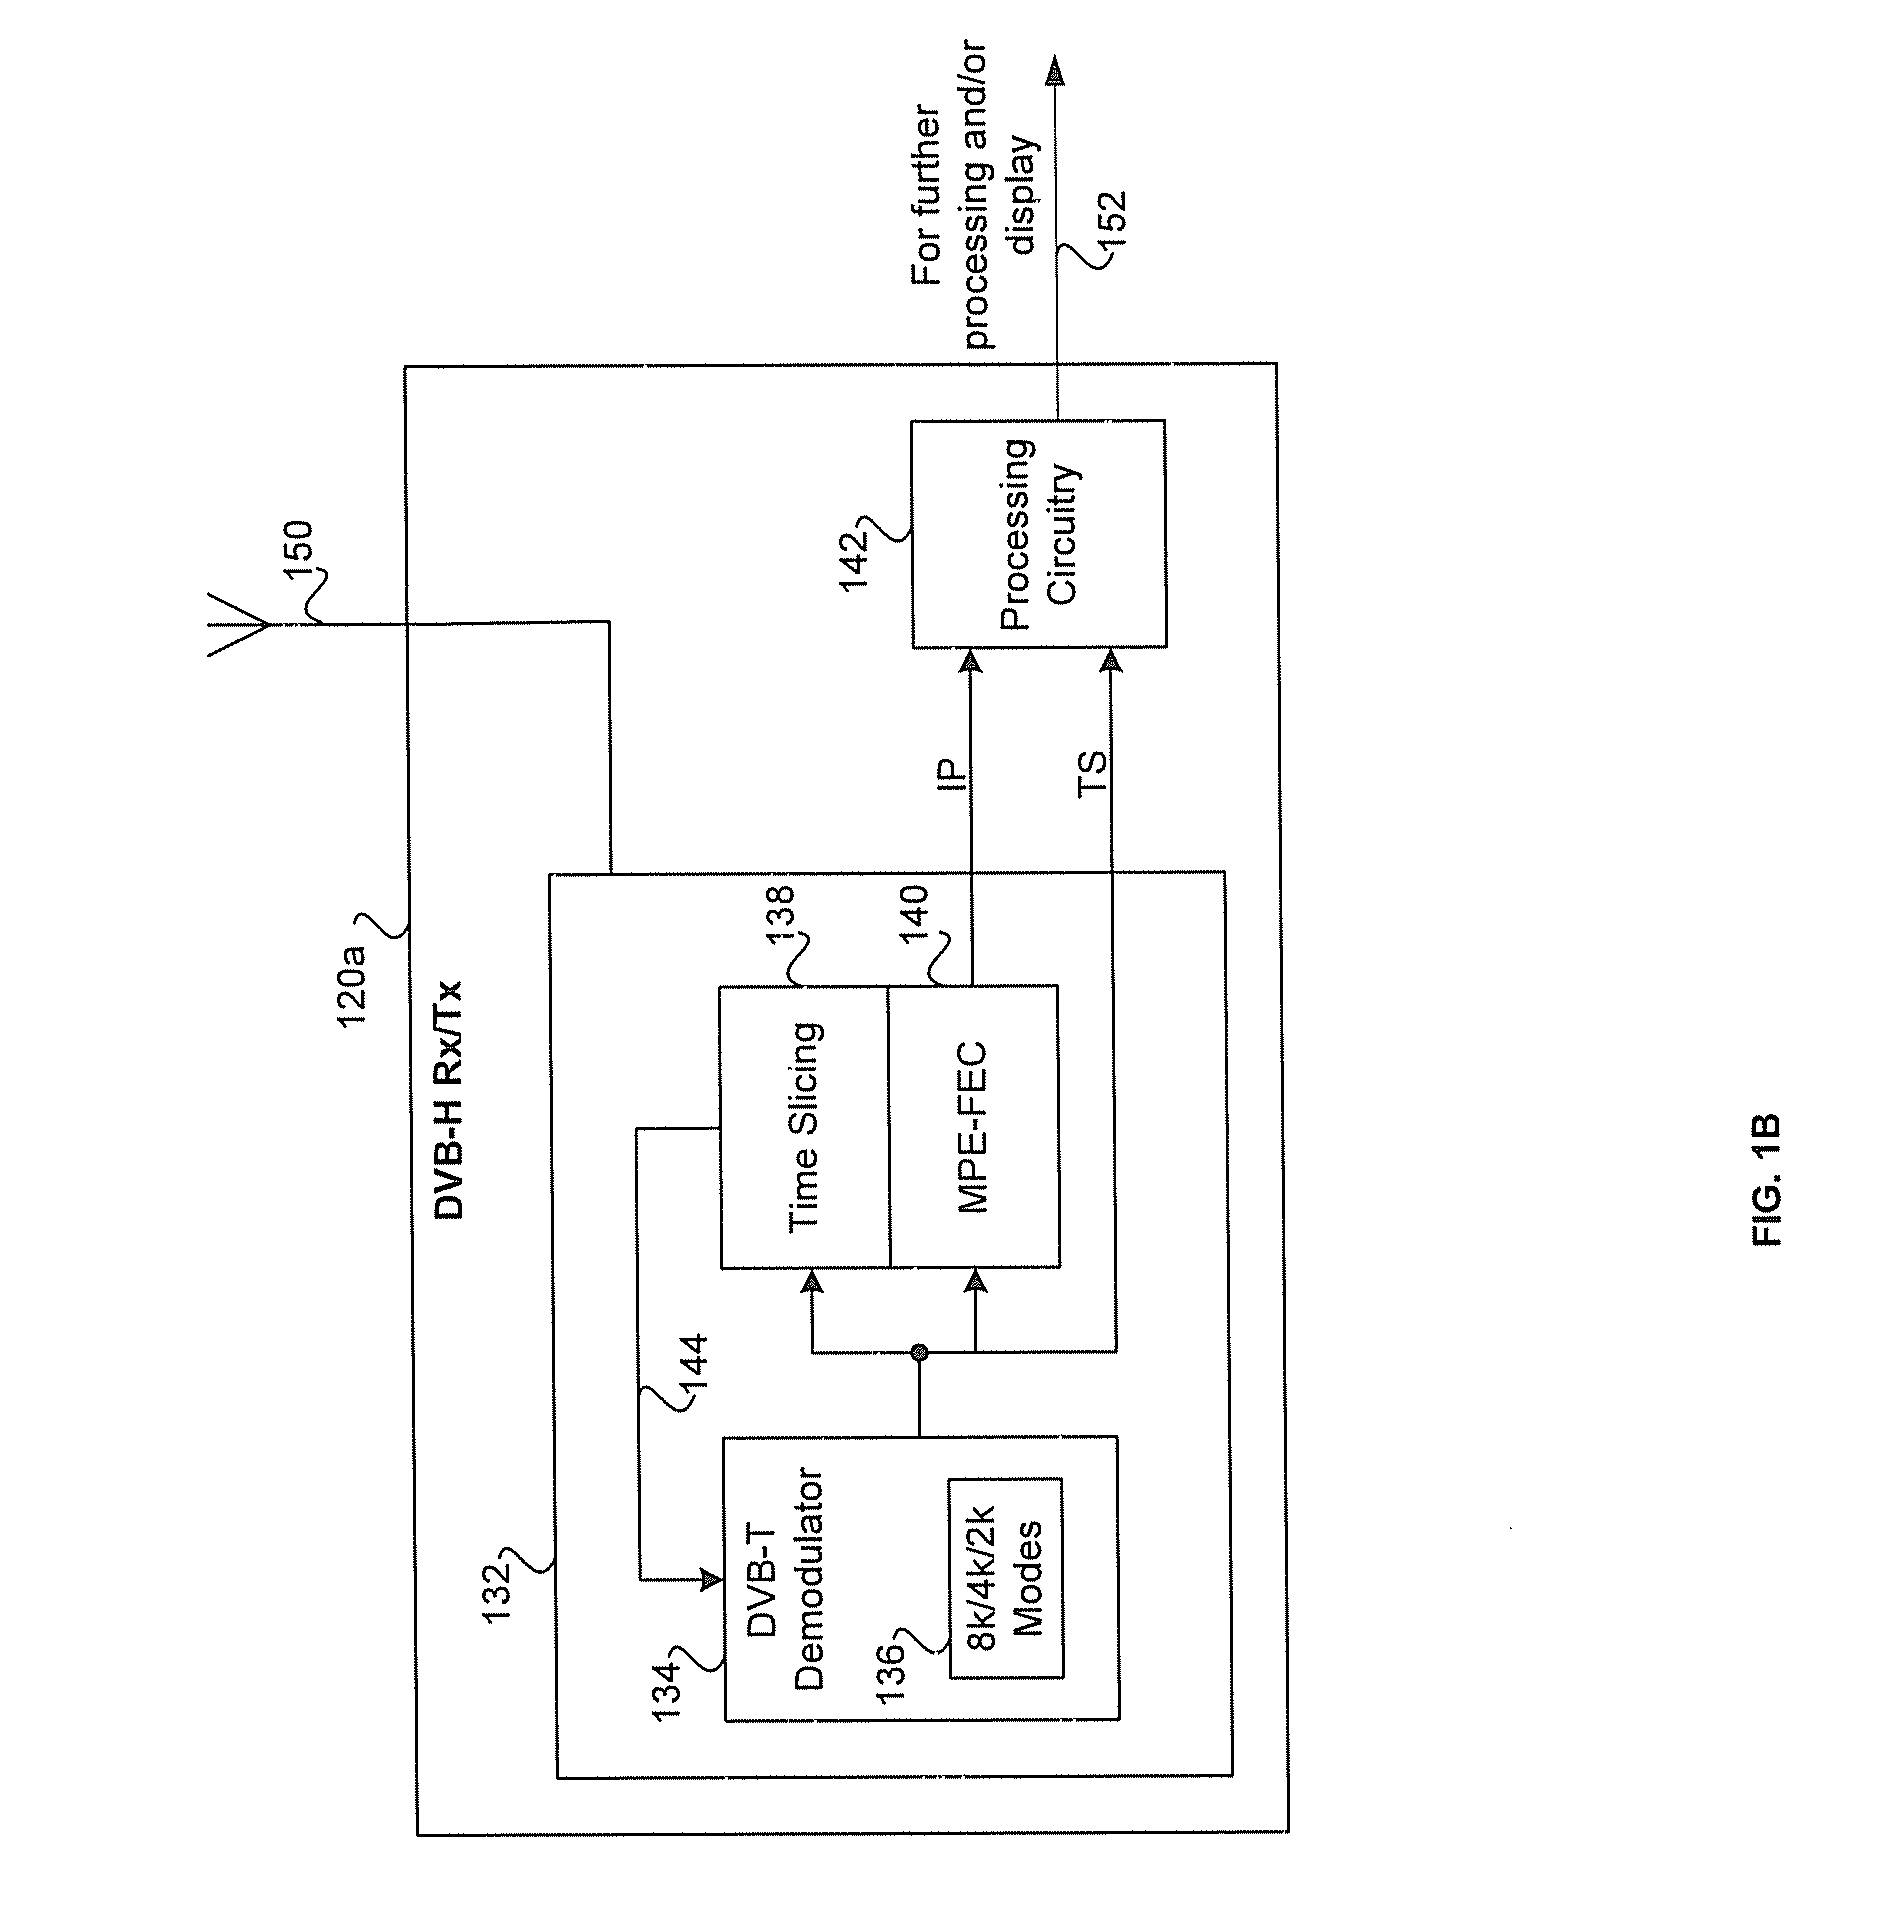 Method And System For Integrated Cable Modem And DVB-H Receiver And/Or Transmitter